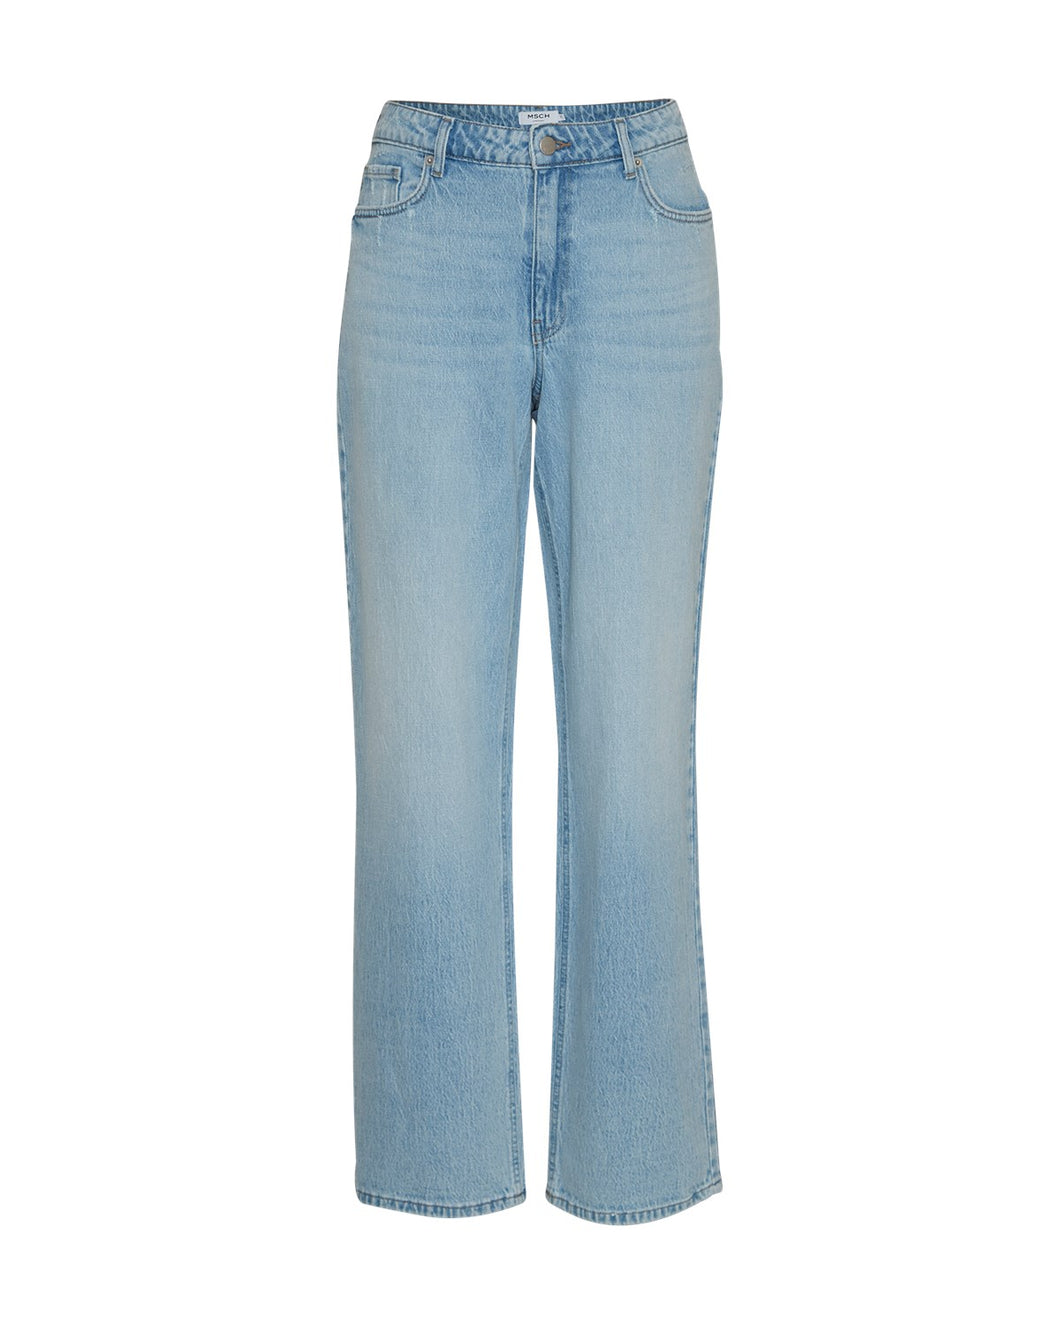 MSCHSora Relaxed Jeans, Blue Wash